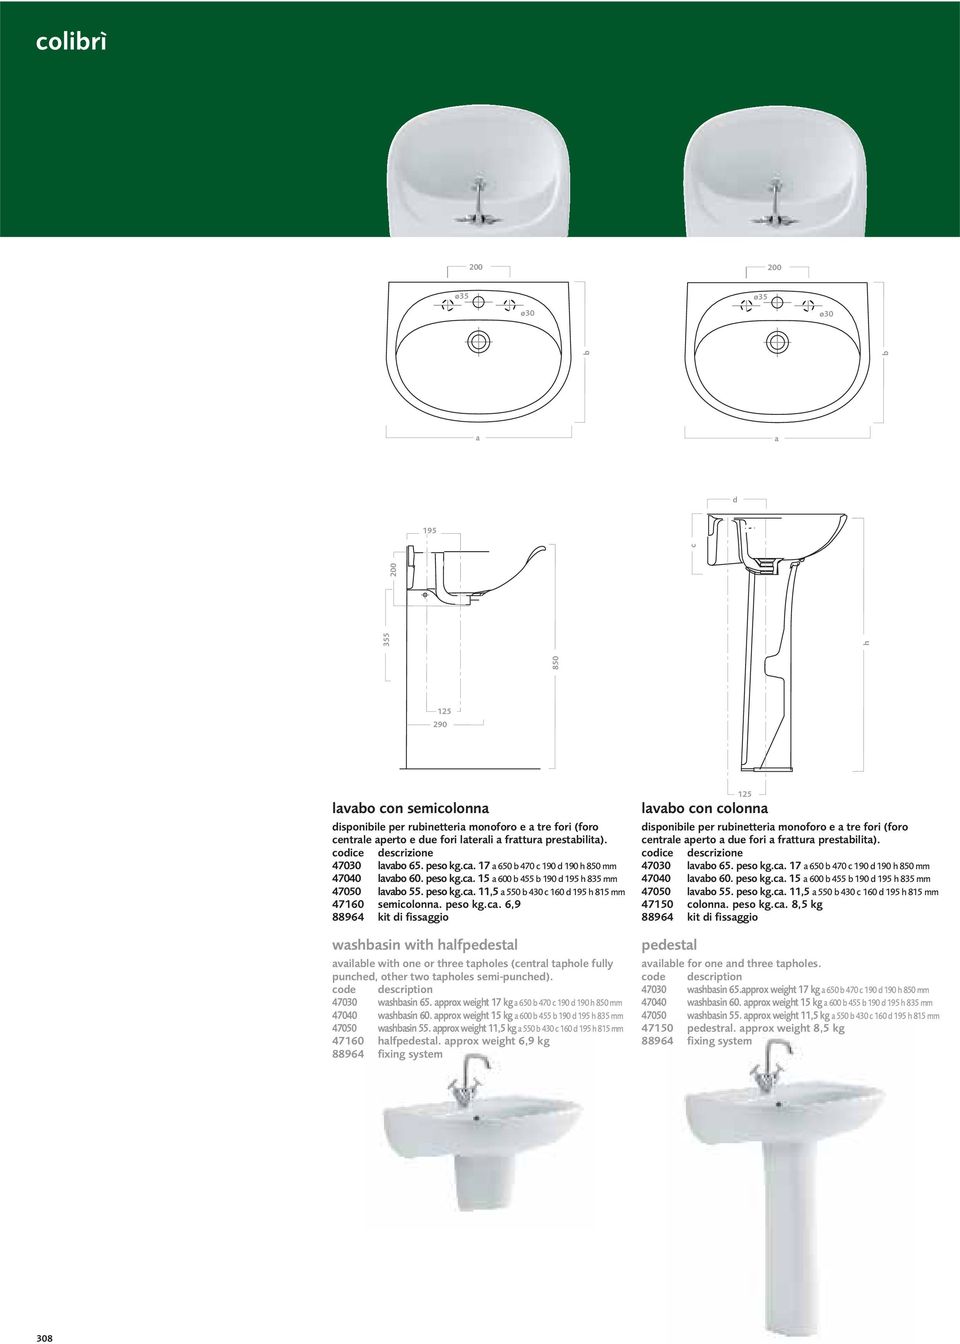 peso kg.ca. 6,9 88964 kit di fissaggio washbasin with halfpedestal available with one or three tapholes (central taphole fully punched, other two tapholes semi-punched). 47030 washbasin 65.